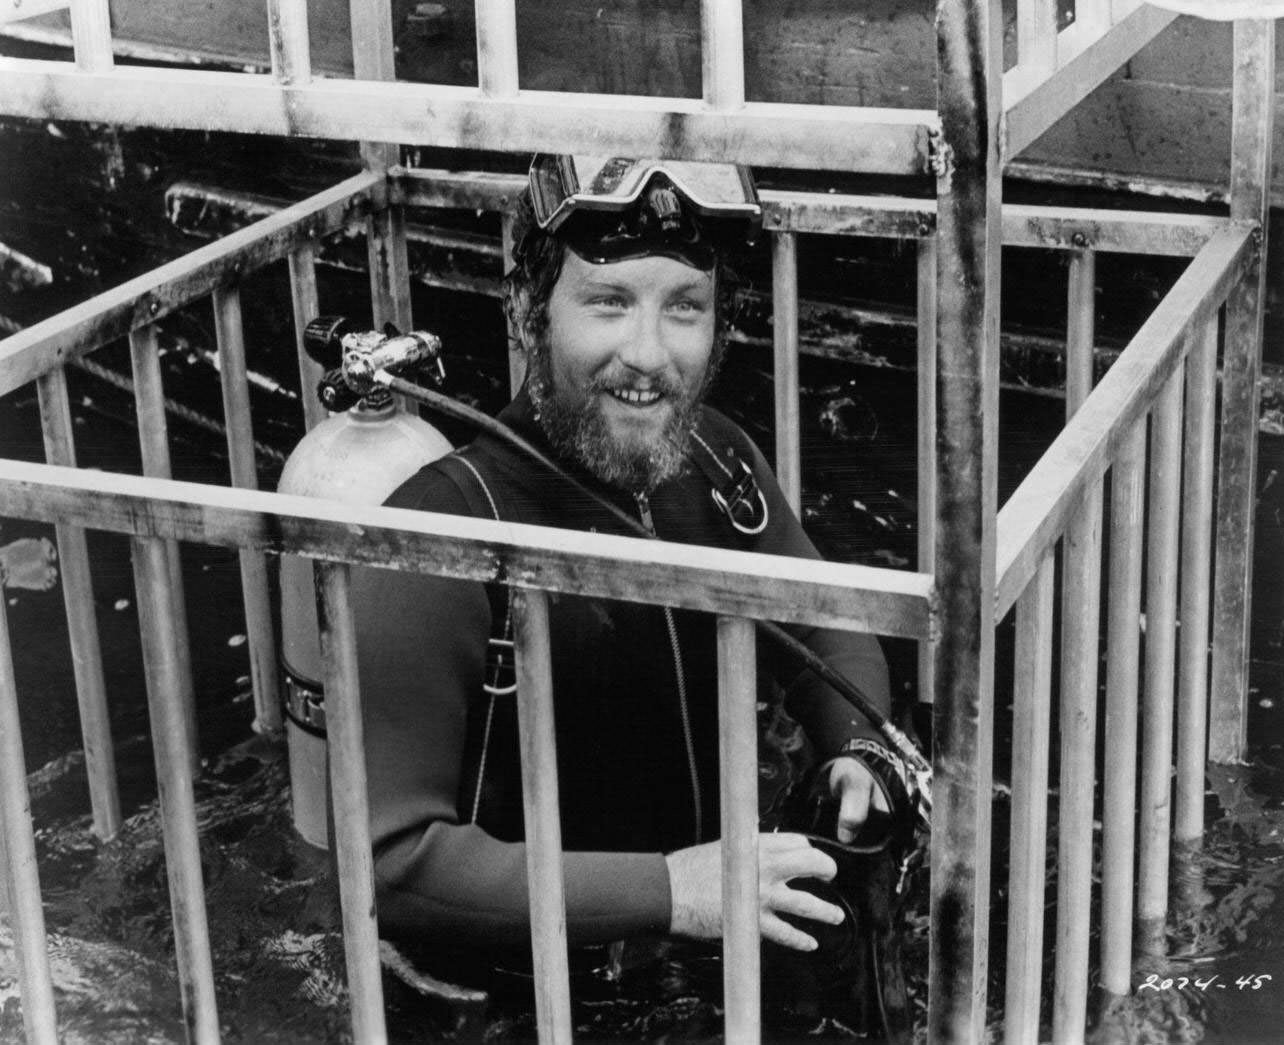 Richard Dreyfuss is lowered into the water in a diving cage in a scene from the film 'Jaws', 1975.